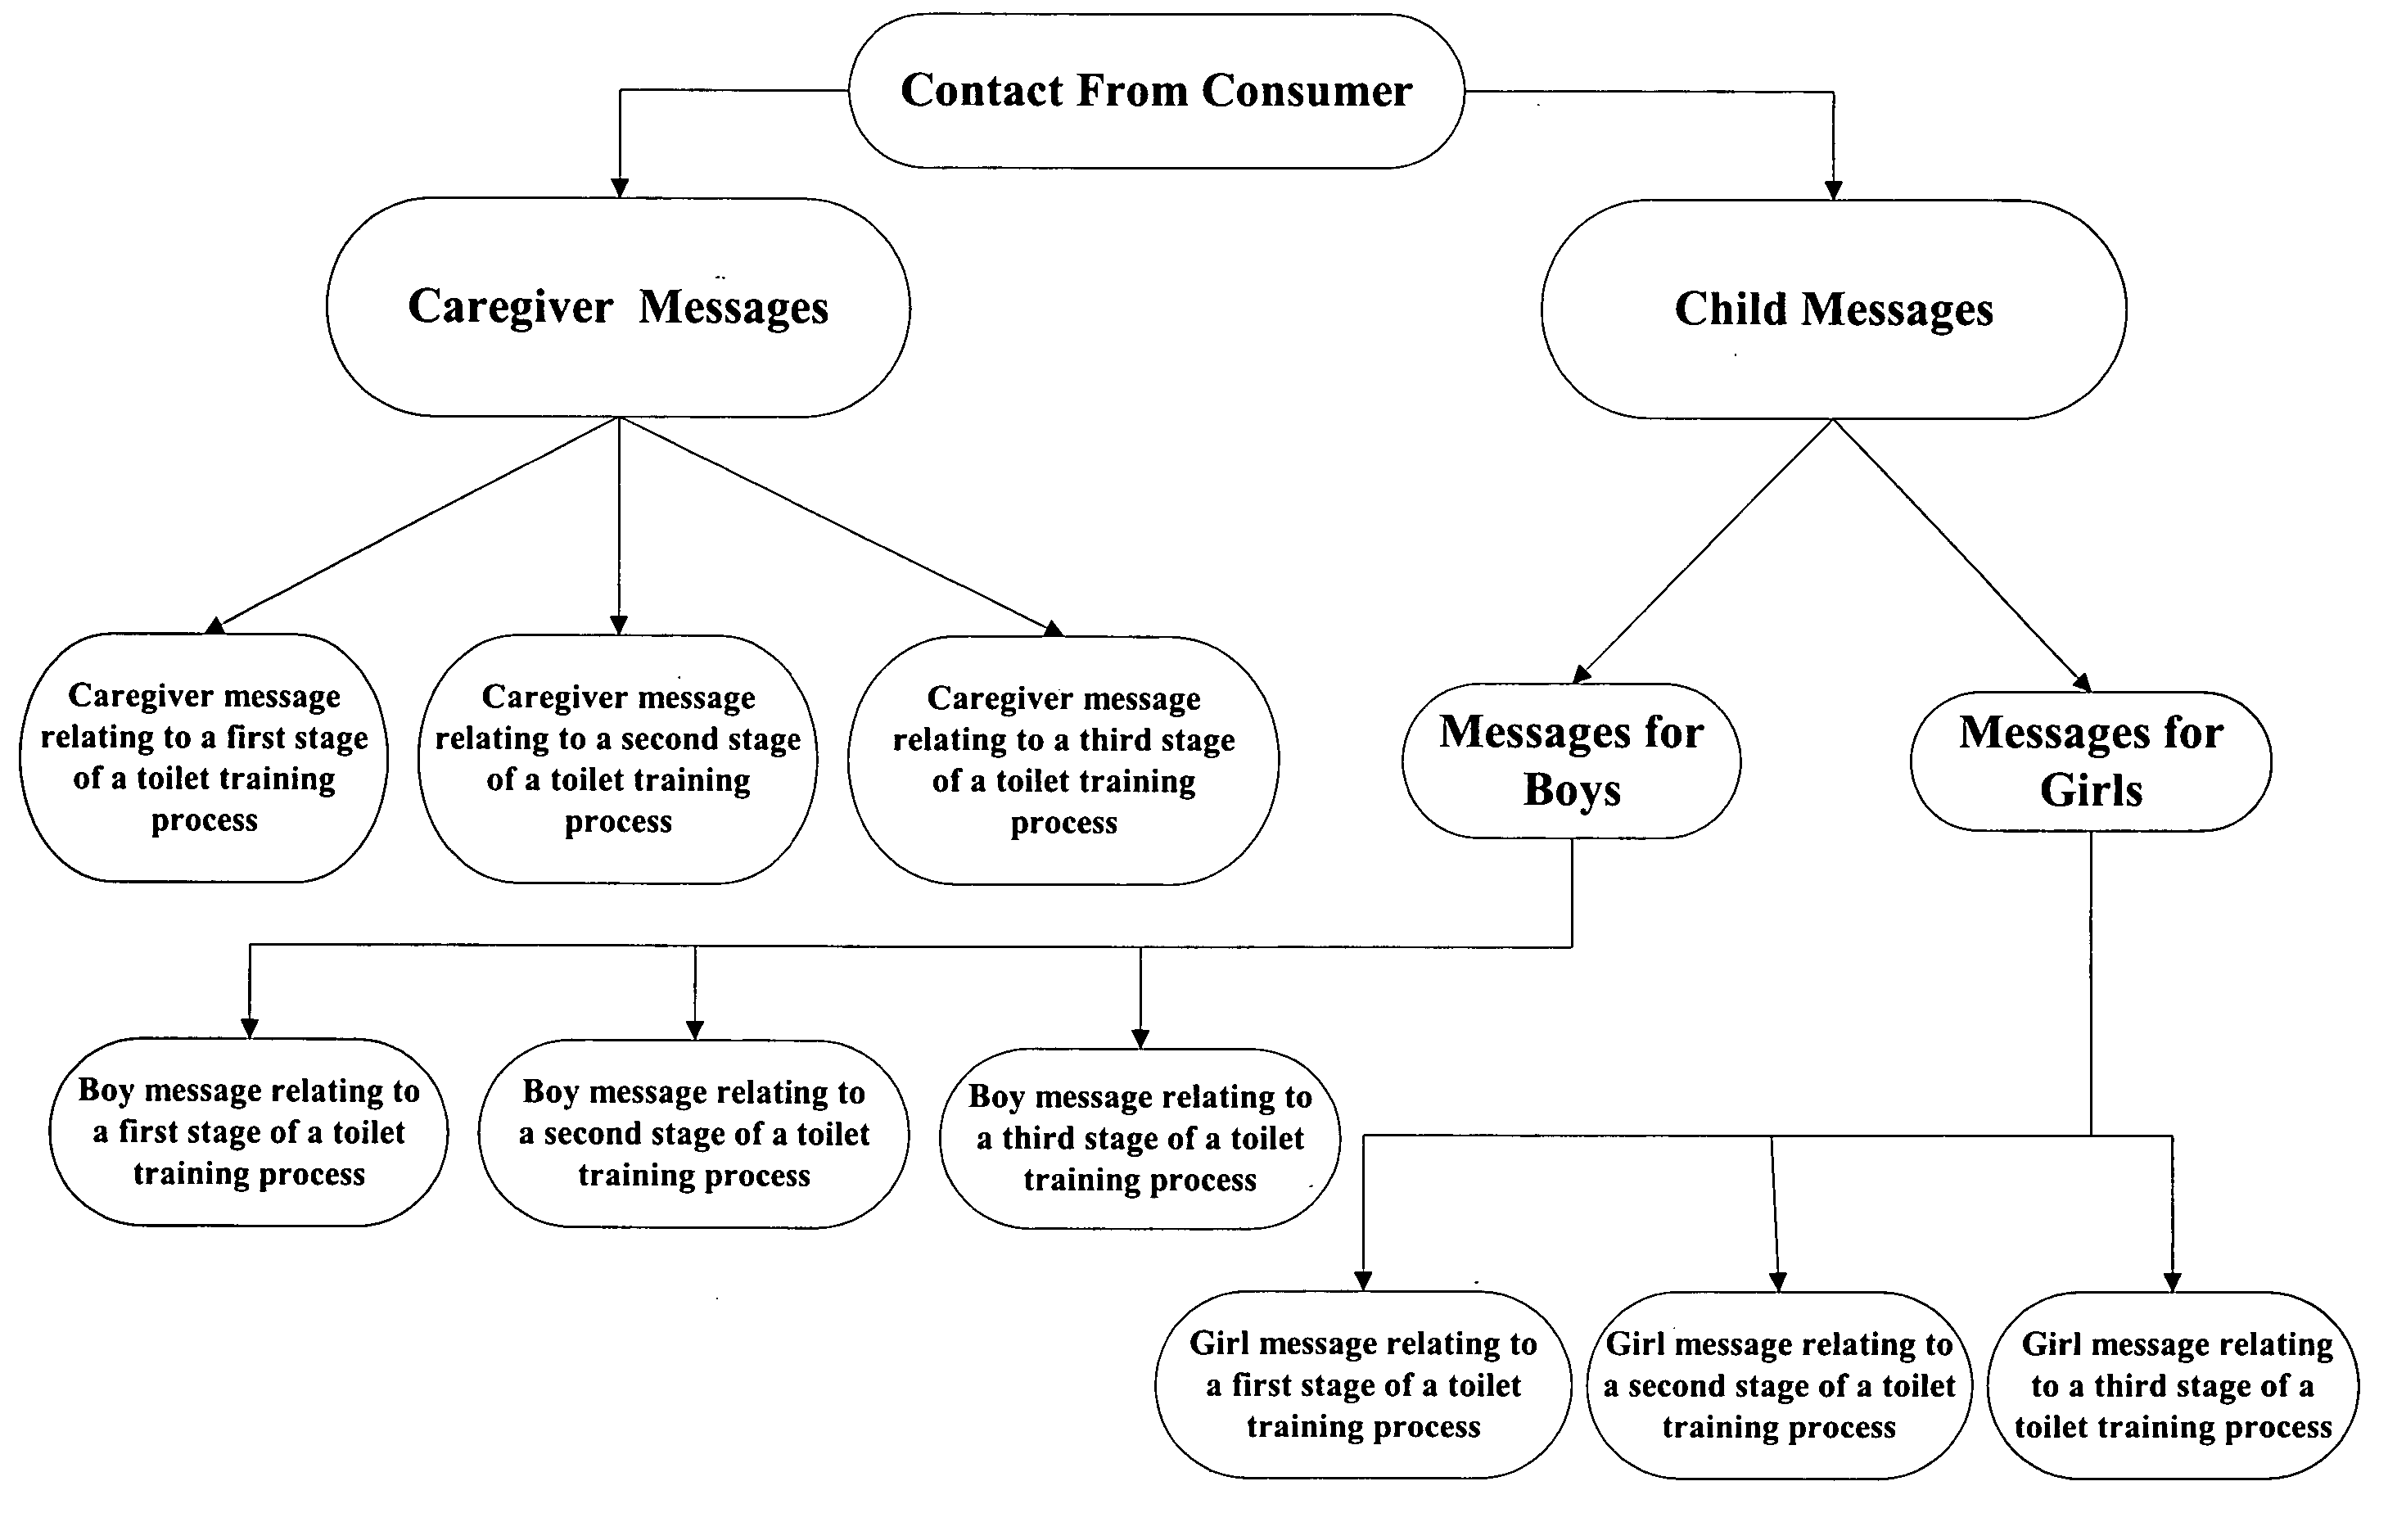 Method of enunciating a prerecorded message related to toilet training in response to a contact